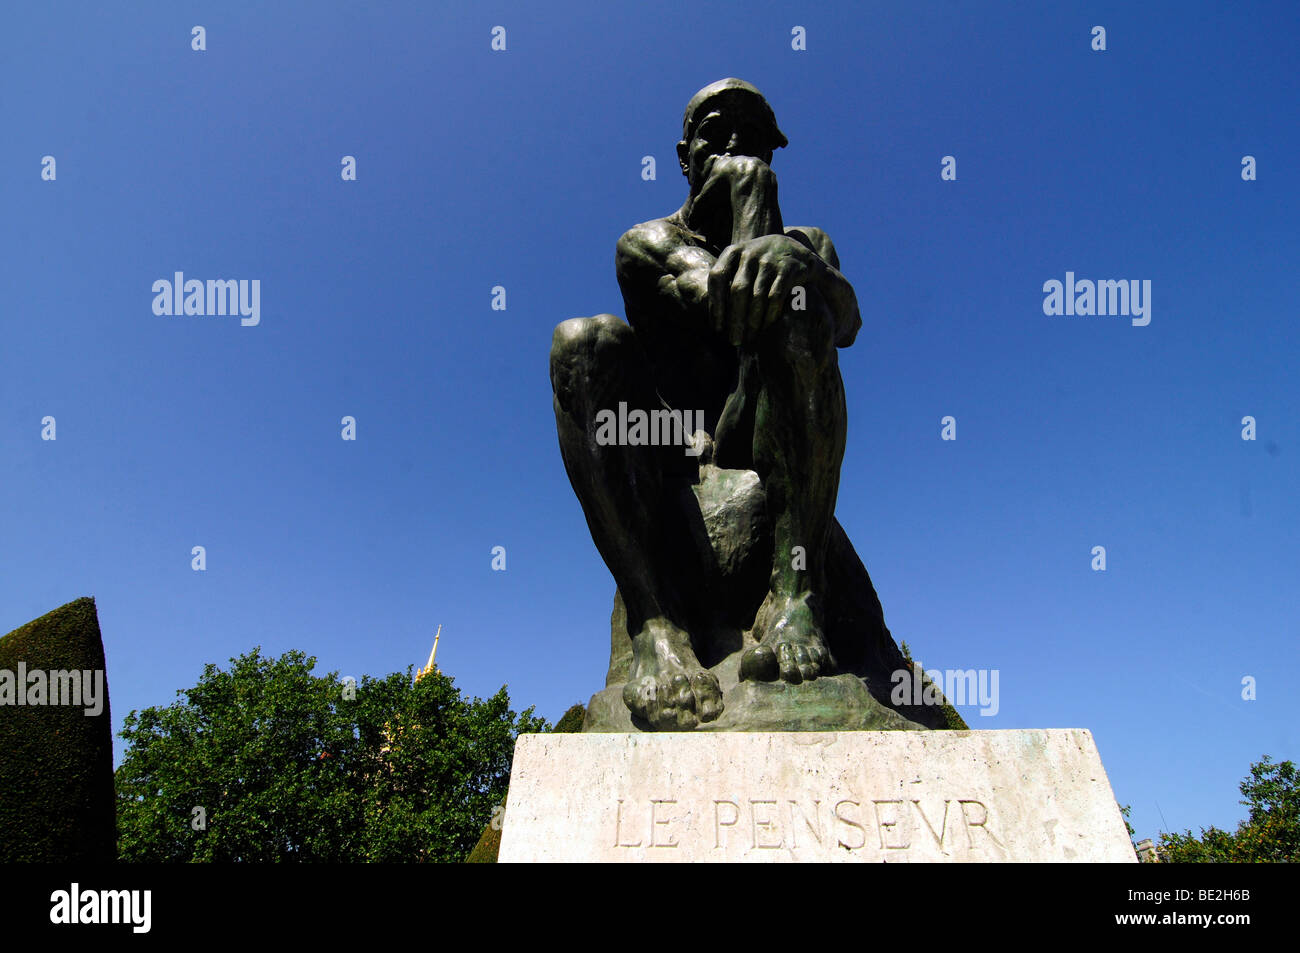 Le Penseur ('the thinker") is Auguste Rodin's masterwork sculpture; on display at the Rodin museum garden in Paris, France. Stock Photo